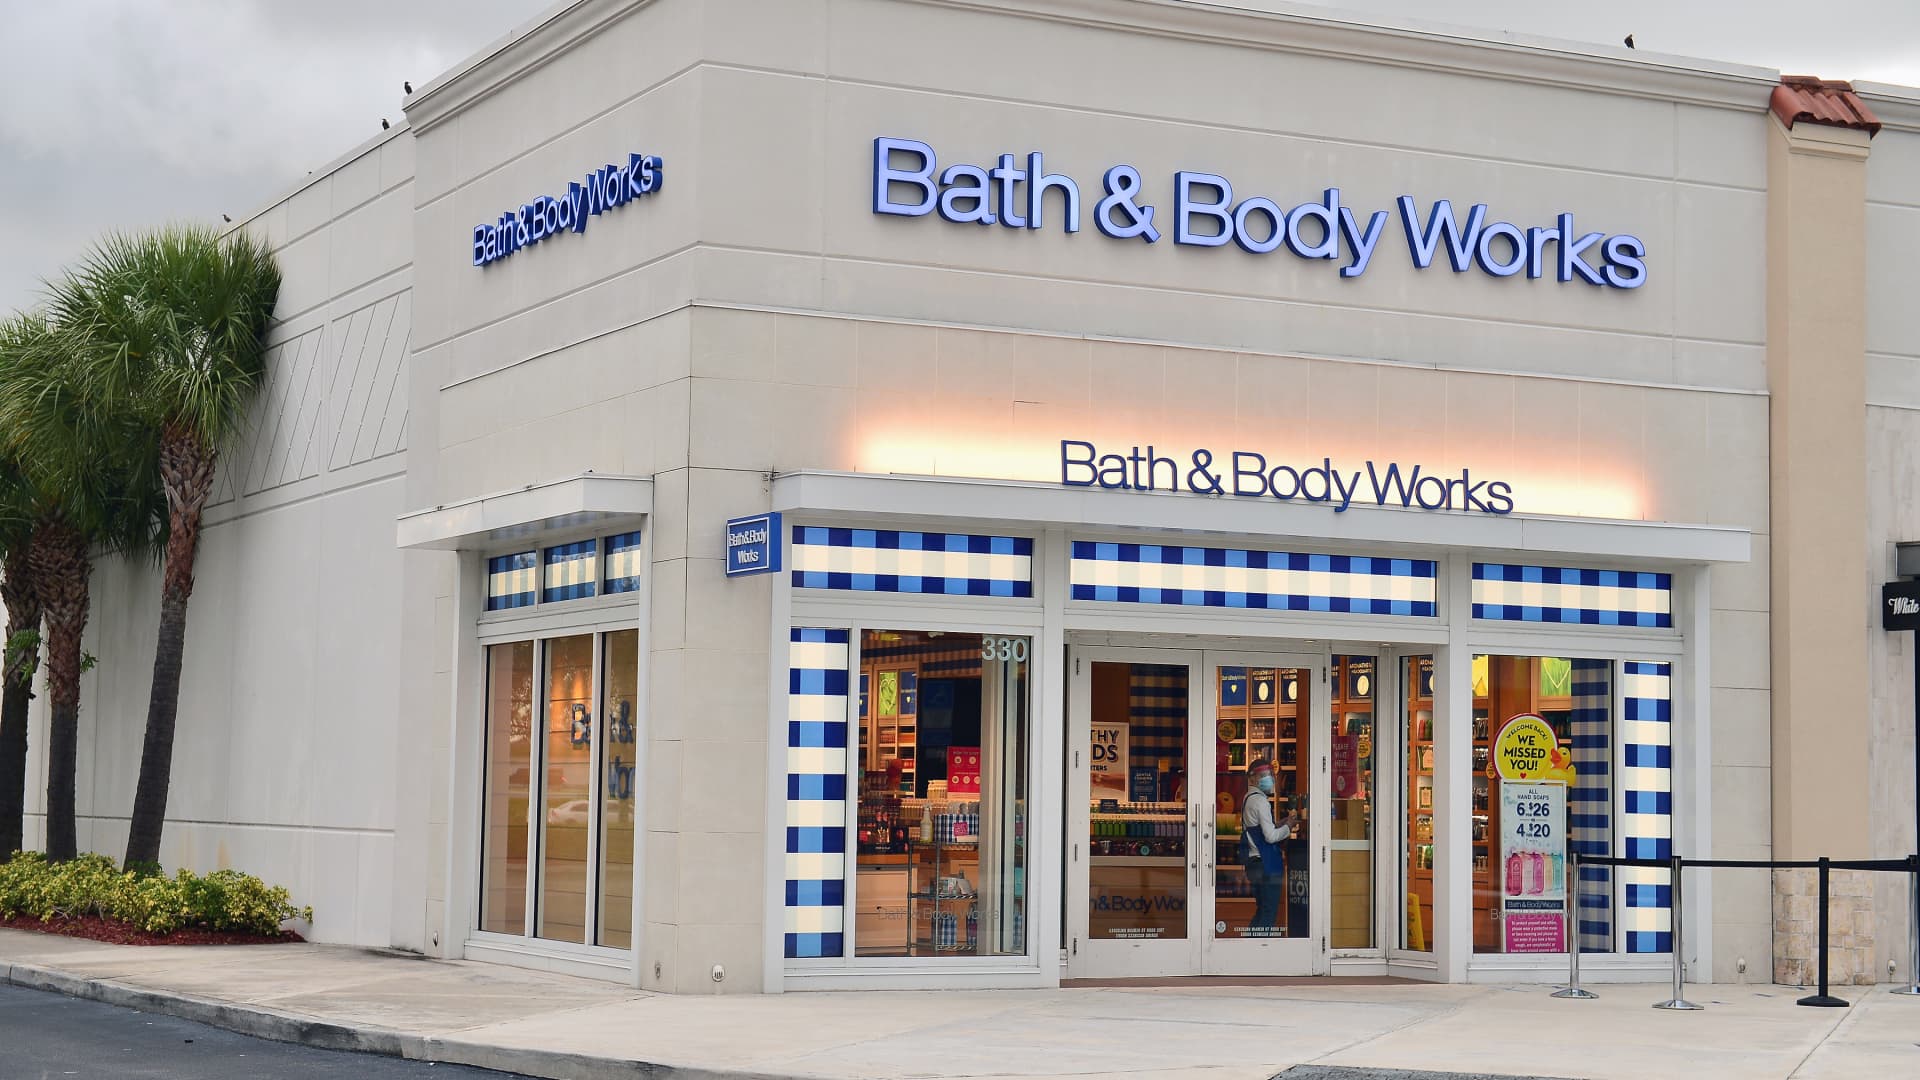 An employee with a face mask and shield cleans the door of Bath & Body Works store on July 21, 2020 in Pembroke Pines, Florida.